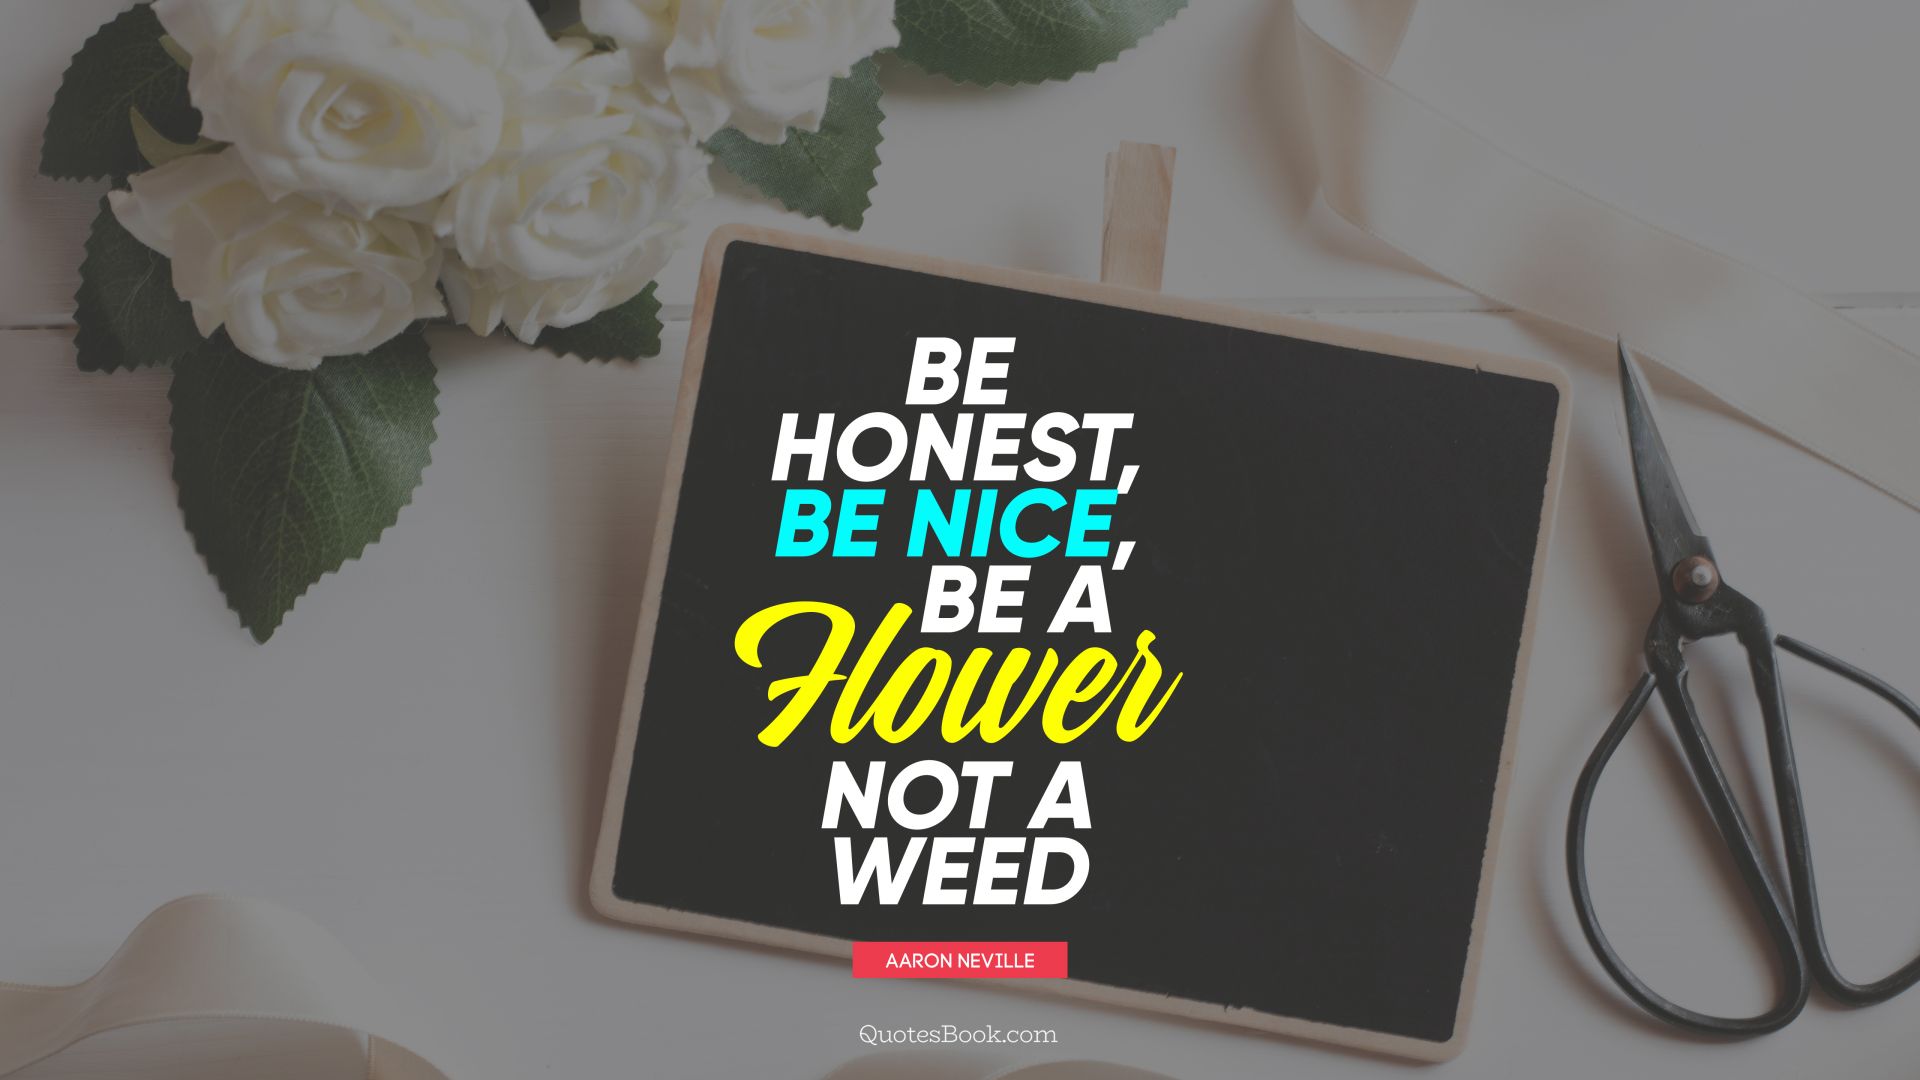 Be honest, be nice, be a flower not a weed. - Quote by Aaron Neville